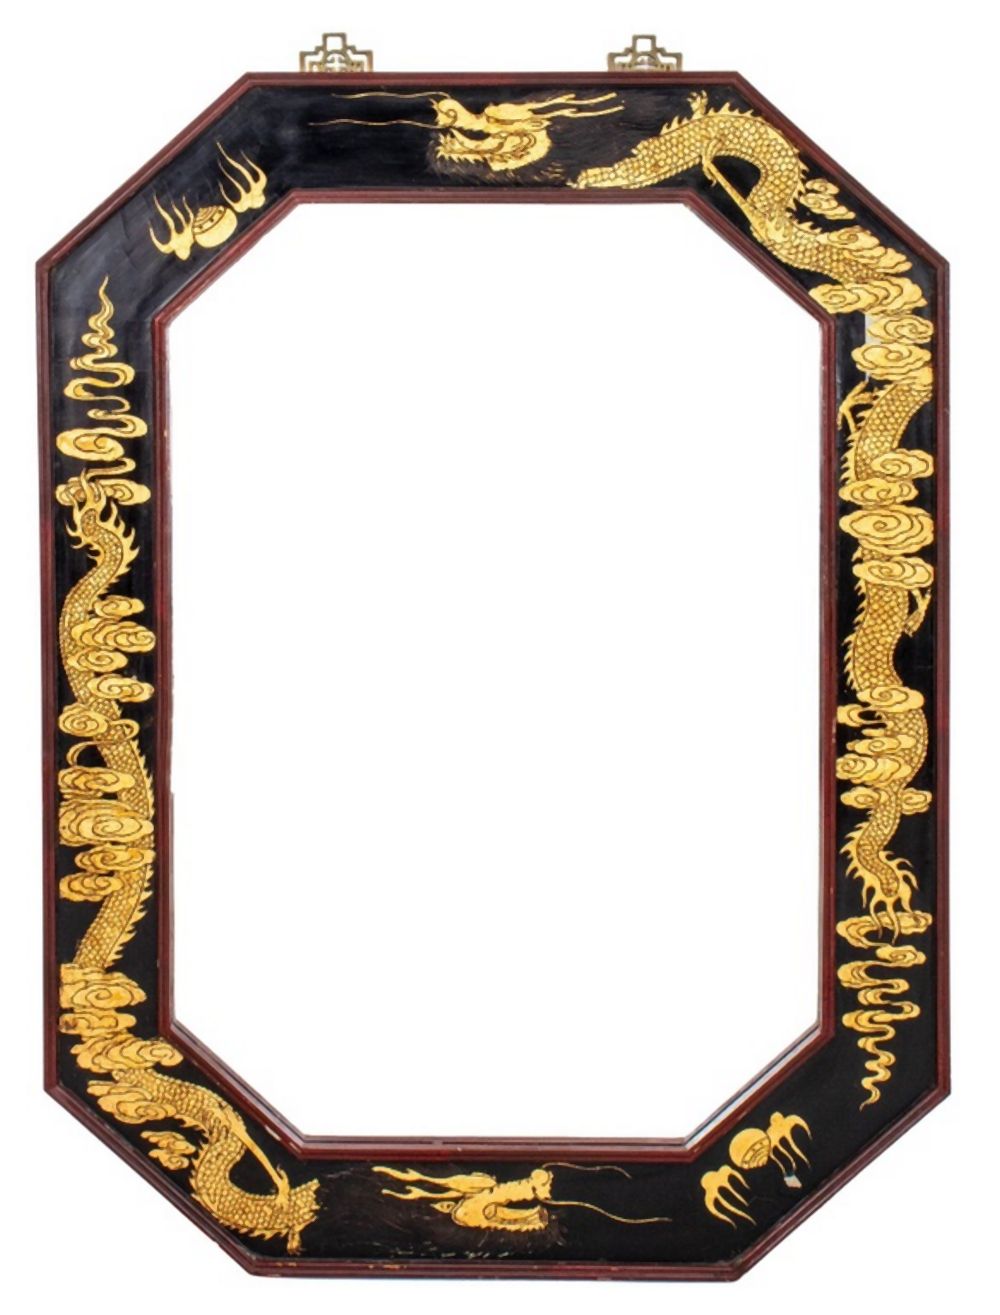 CHINOISERIE LACQUER AND GILT OCTAGONAL